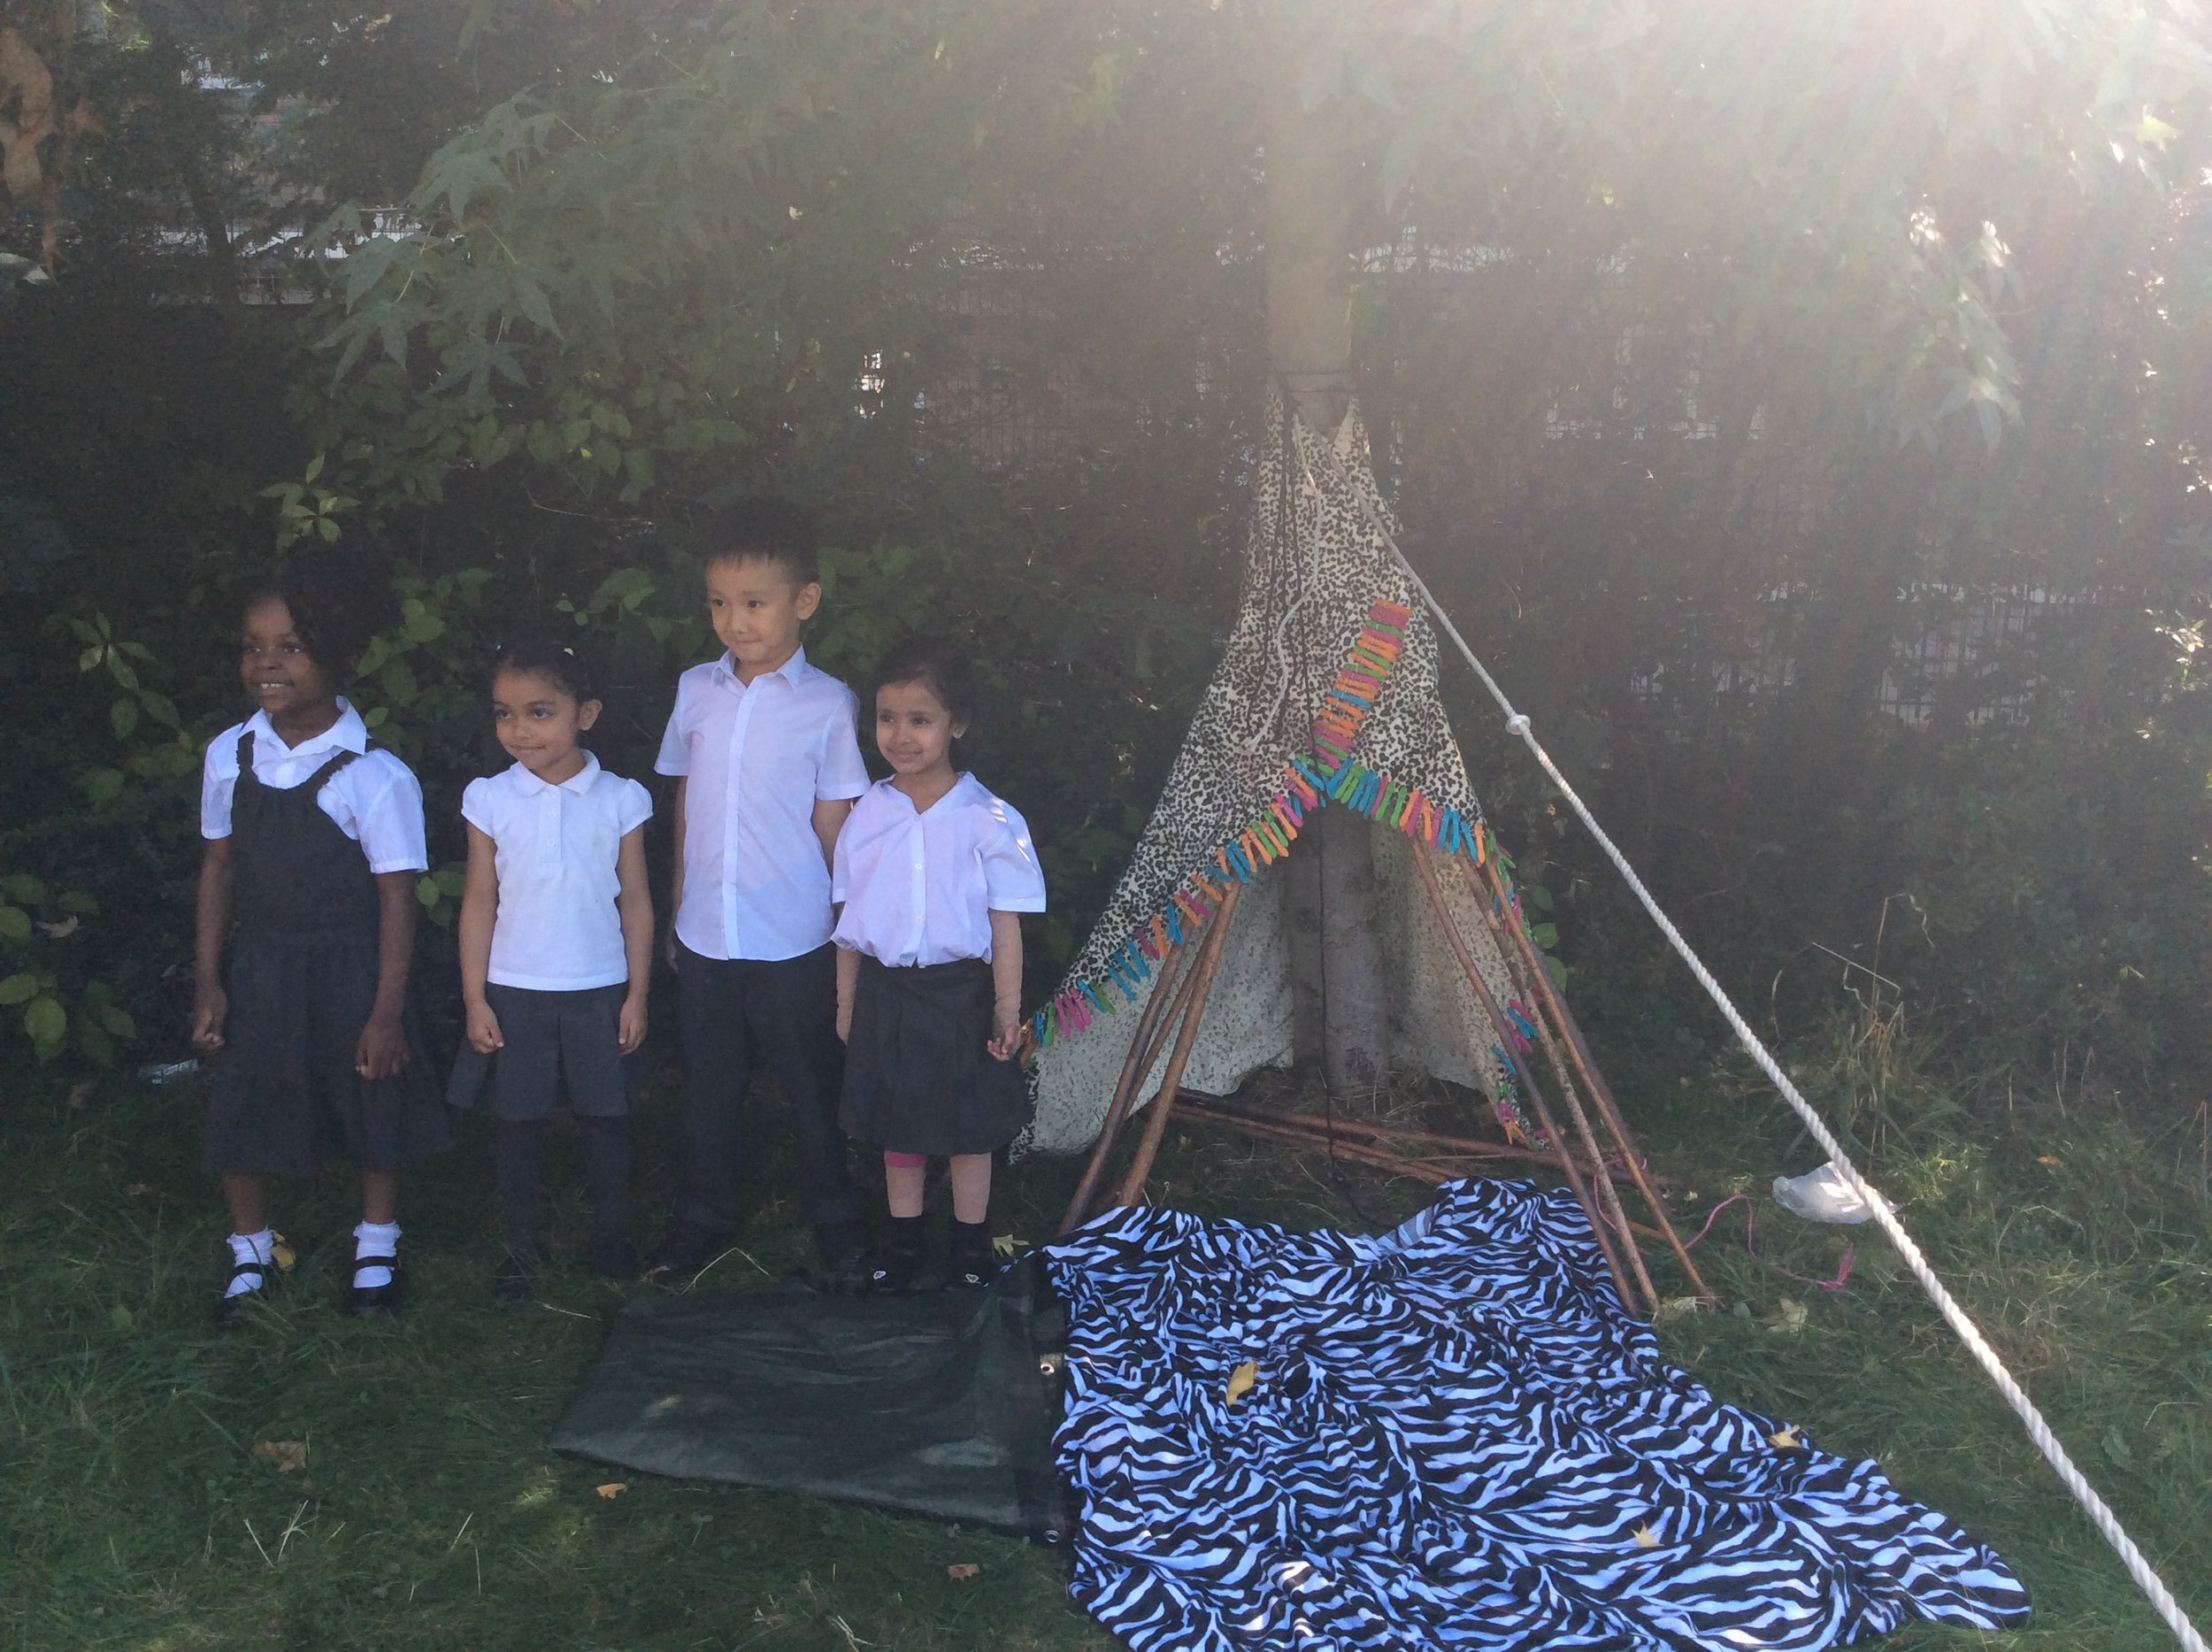 Forest School - Building Shelters Using Materials